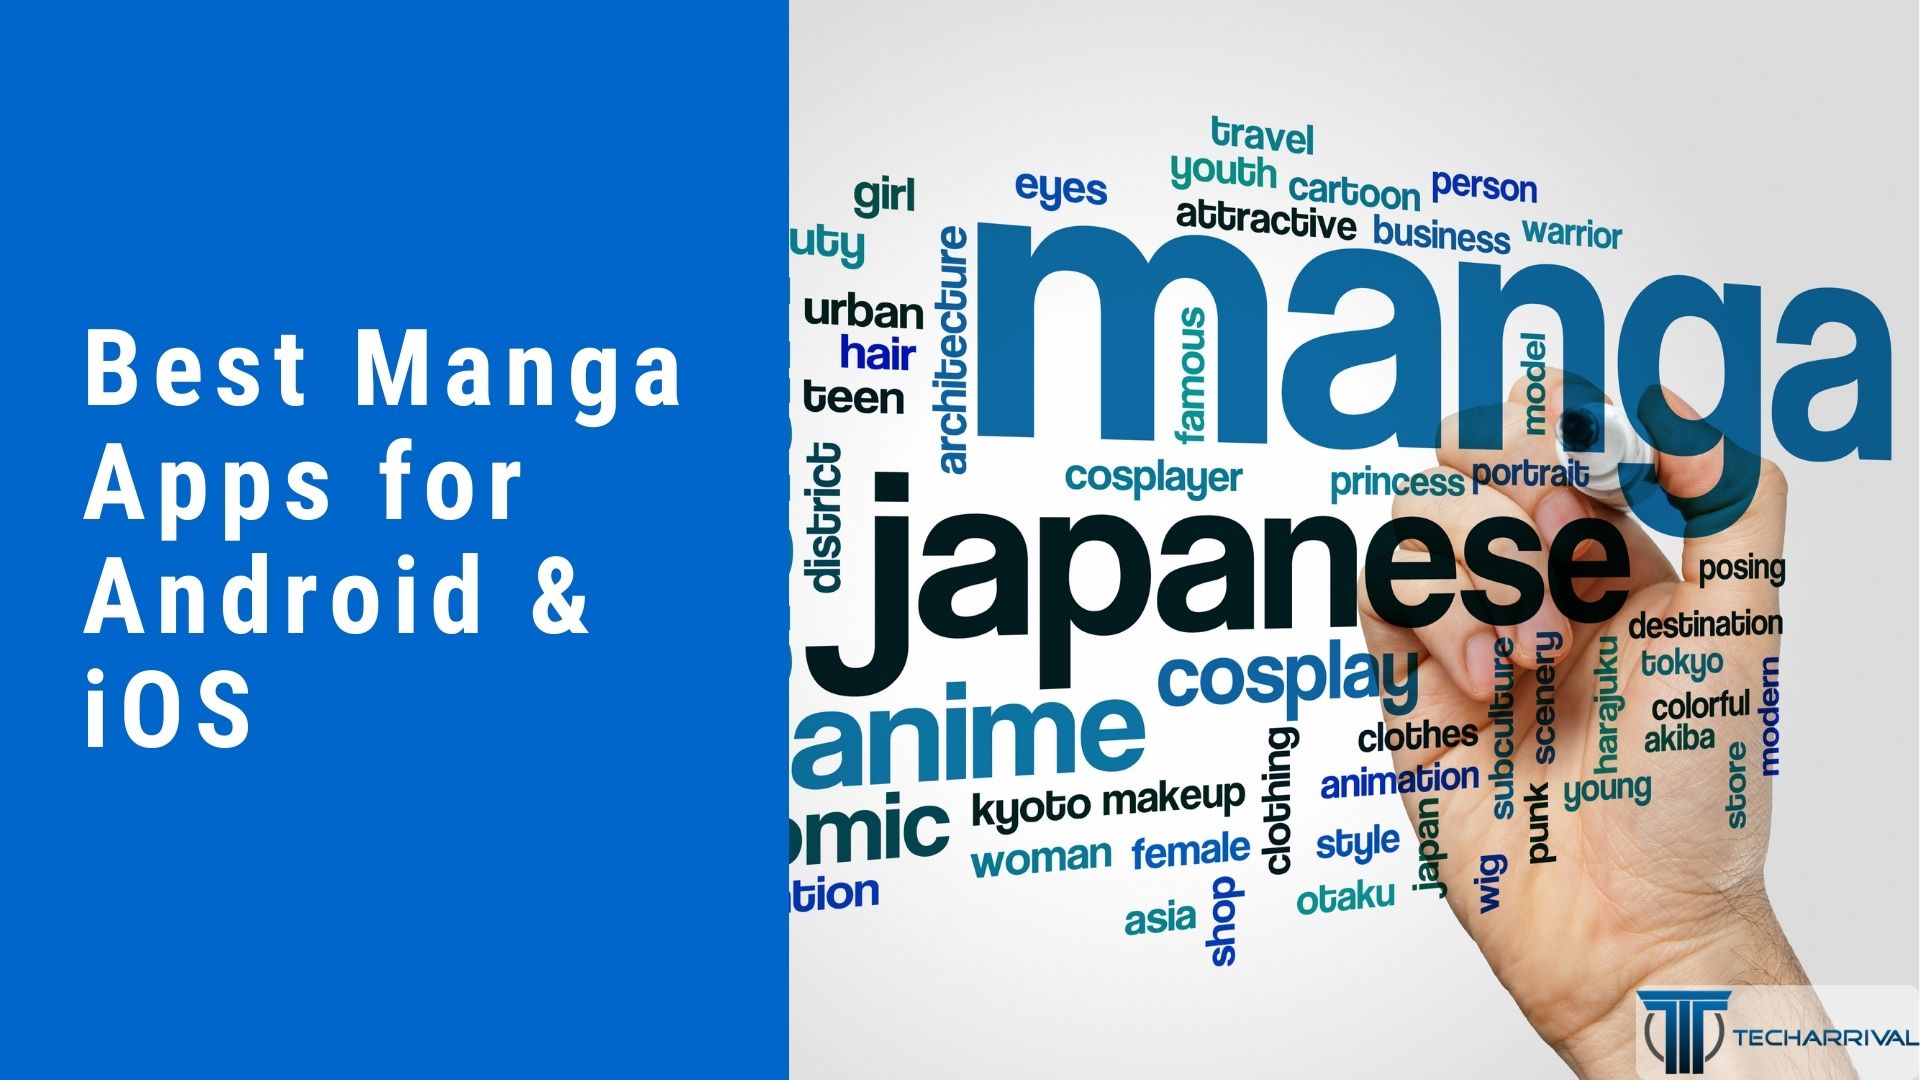 The 6 Best Manga Apps for Android and iOS